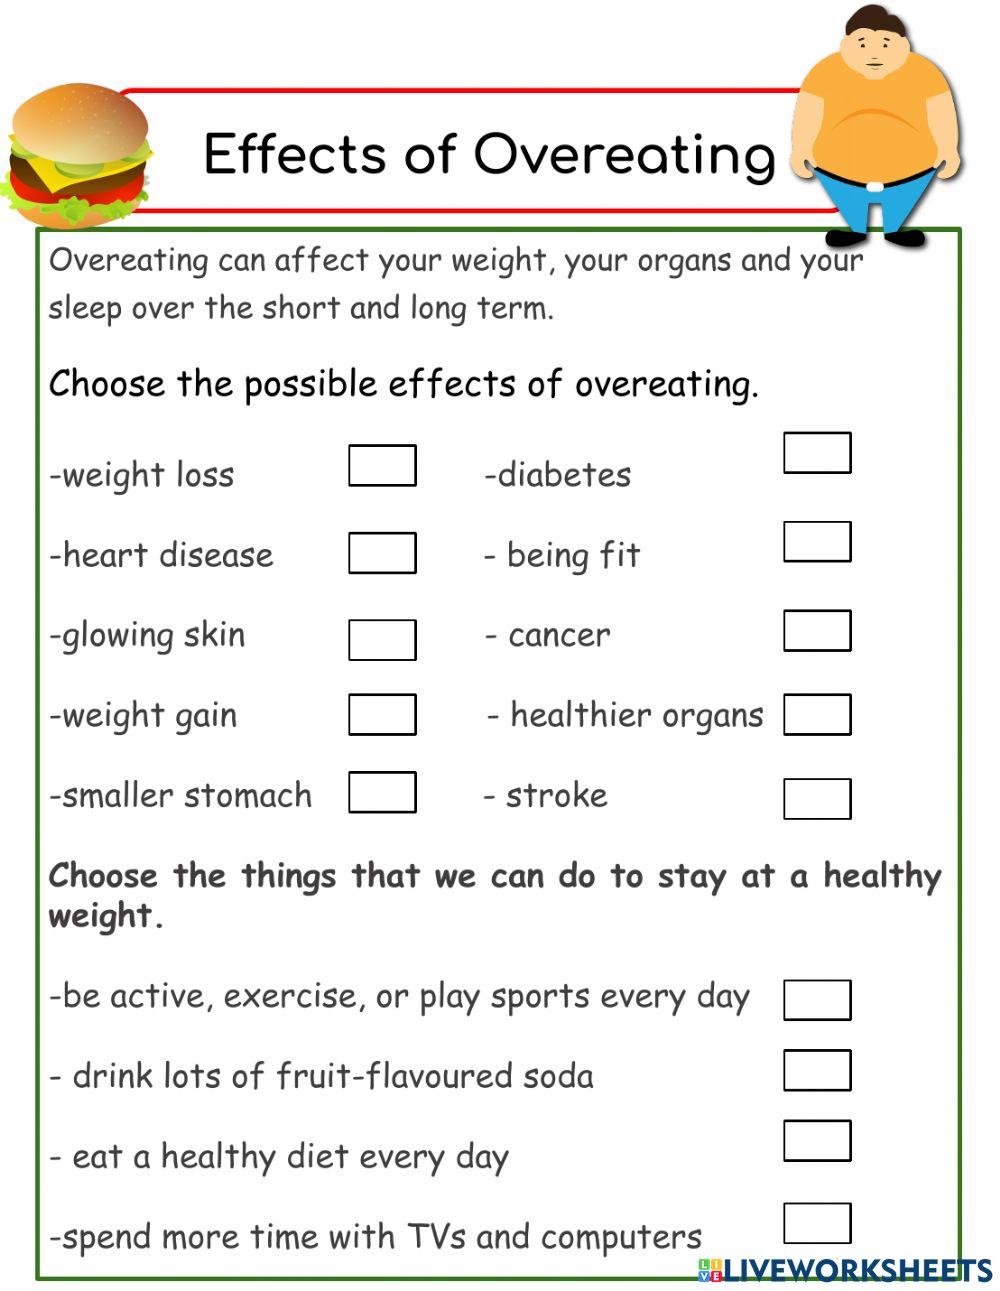 Effects of Overeating